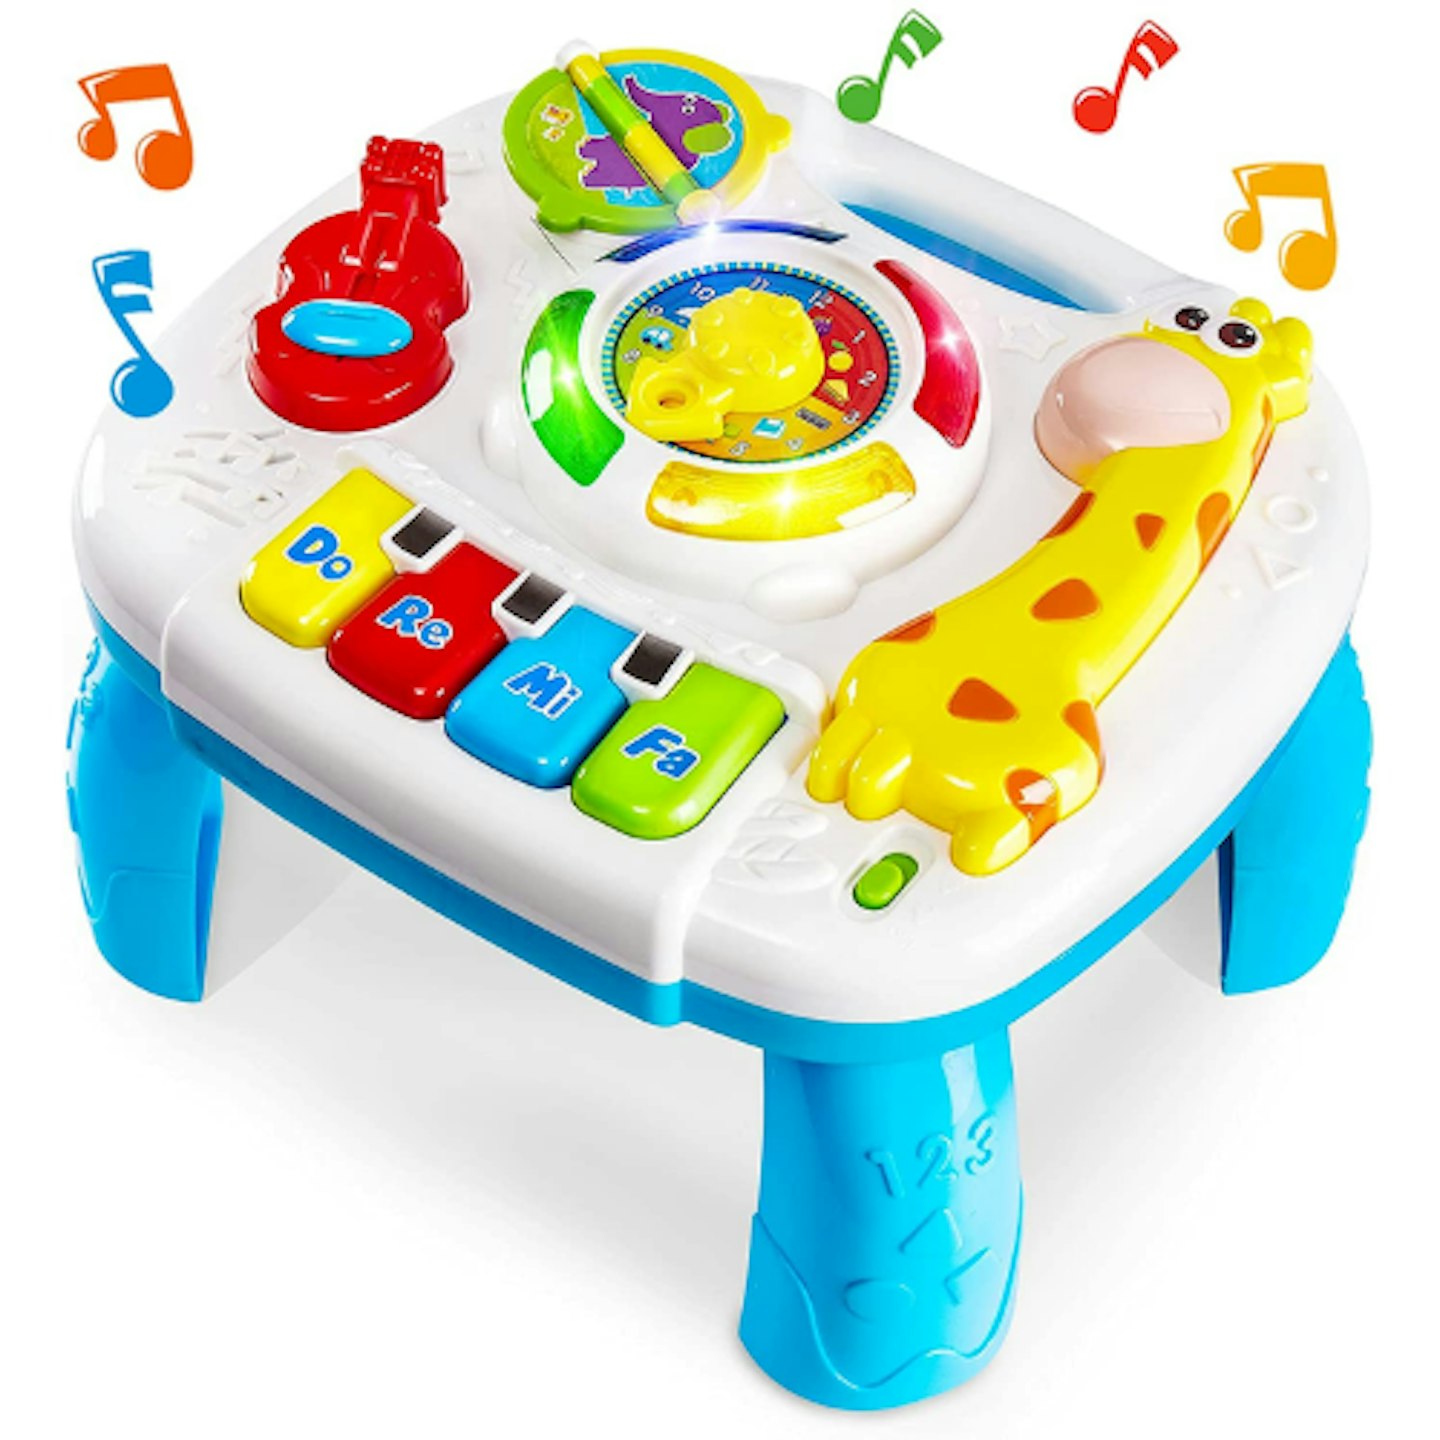 HERSITY Musical Learning Activity Table